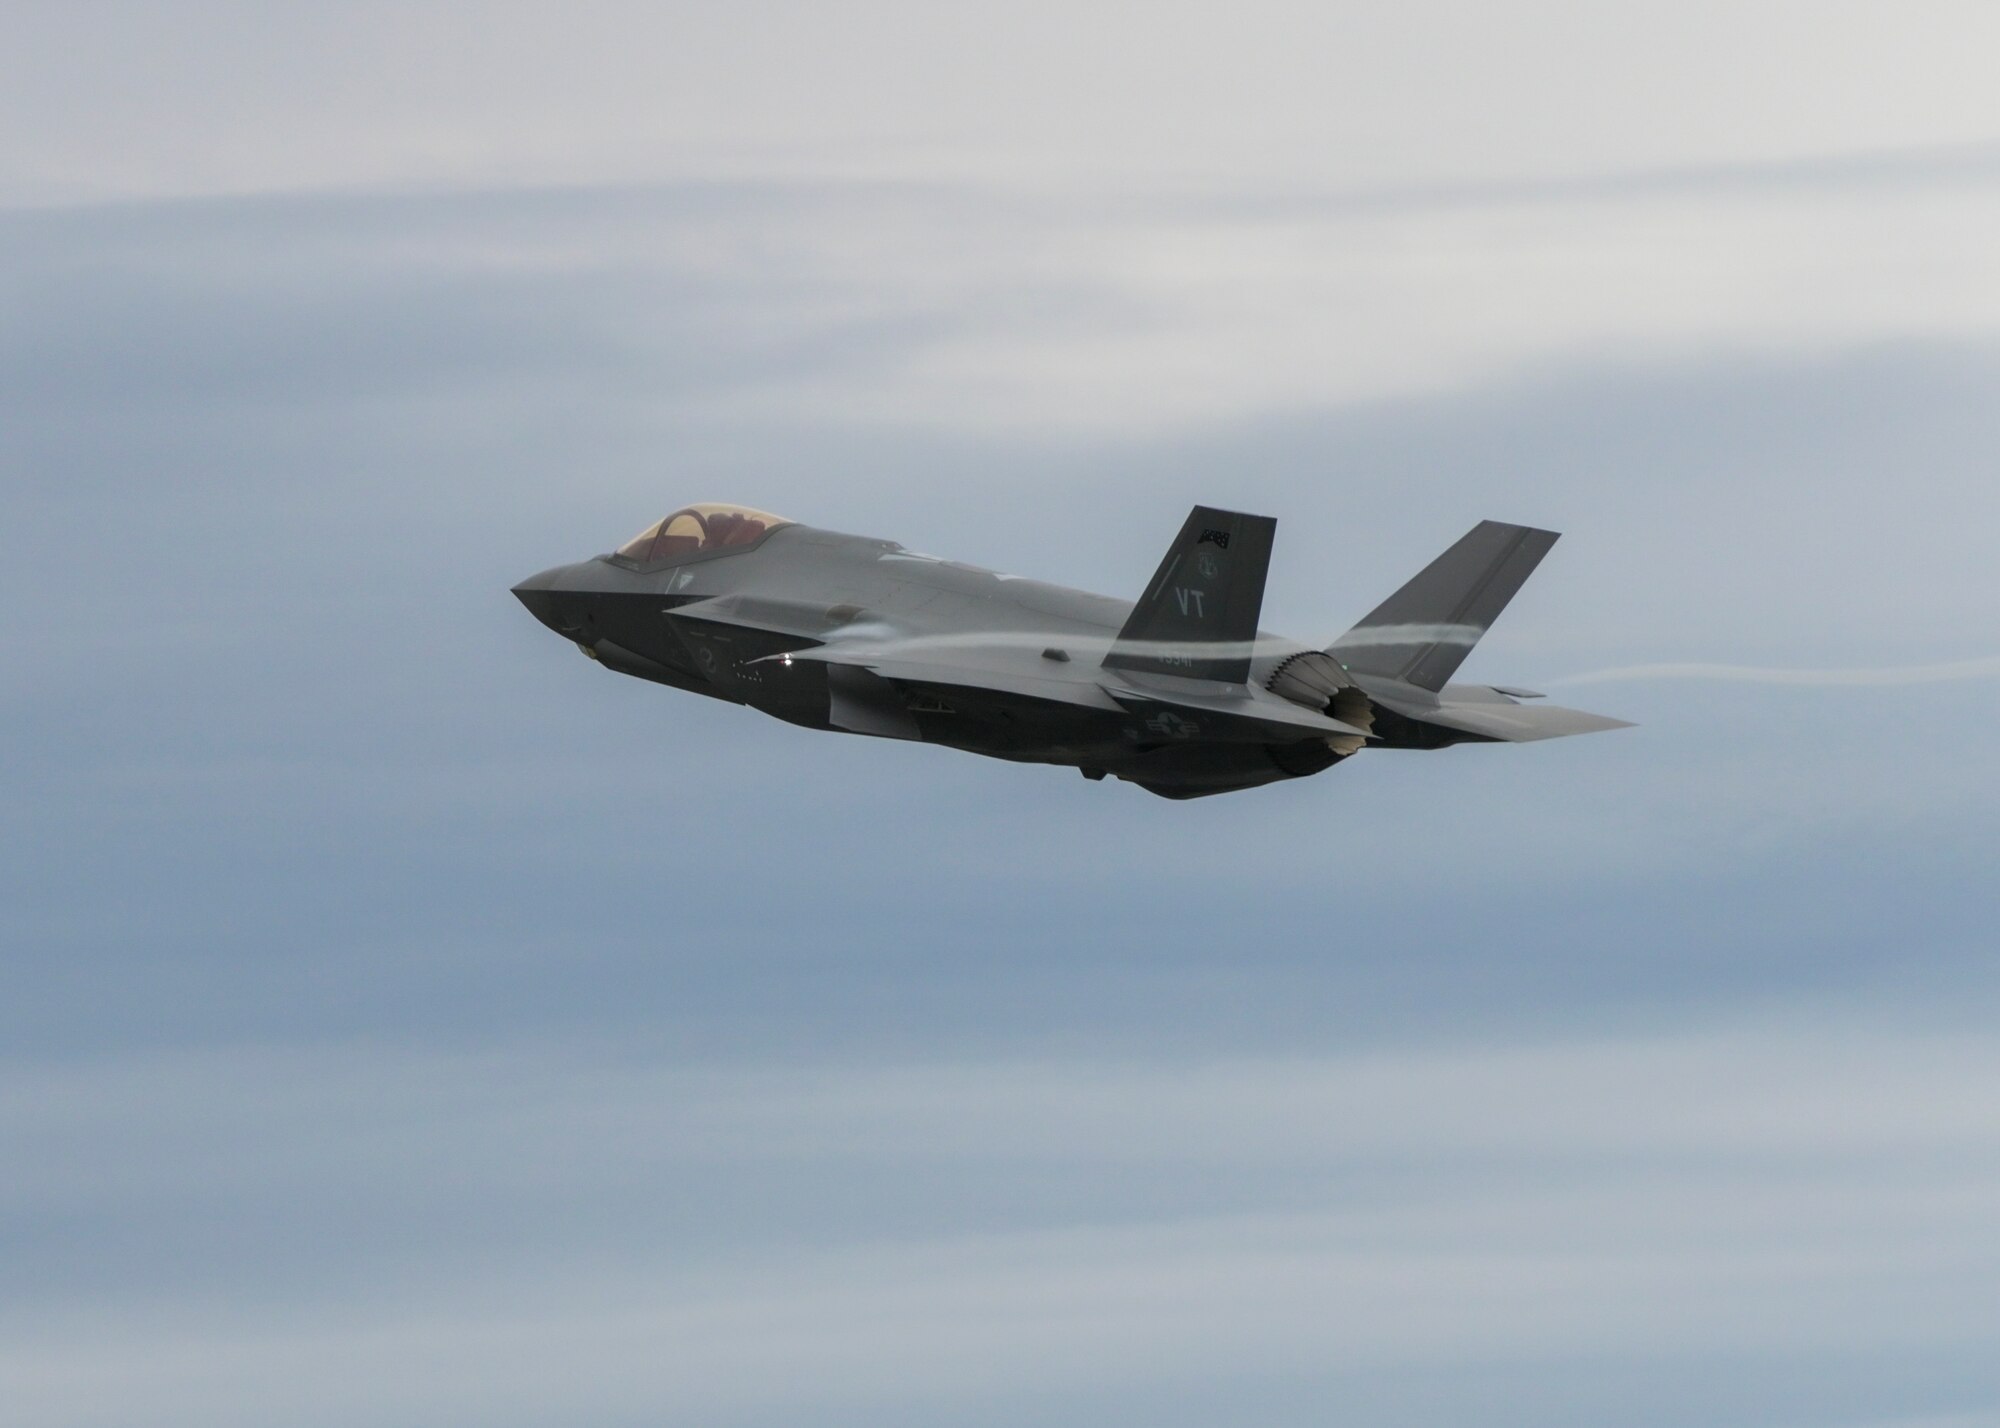 An F-35 Lightning II Aircraft assigned to the 158th Fighter Wing, Burlington Air National Guard Base, Vermont takes off April 13, 2022 from Burlington International Airport, Vermont. The Vermont Air National Guard was the first unit of the Air National Guard to receive the 5th Generation fighter and Madison's 115th Fighter Wing is scheduled to be the second with the arrival of its first F-35 in spring of 2023. (U.S. Air National Guard photo by Staff Sgt. Cameron Lewis)